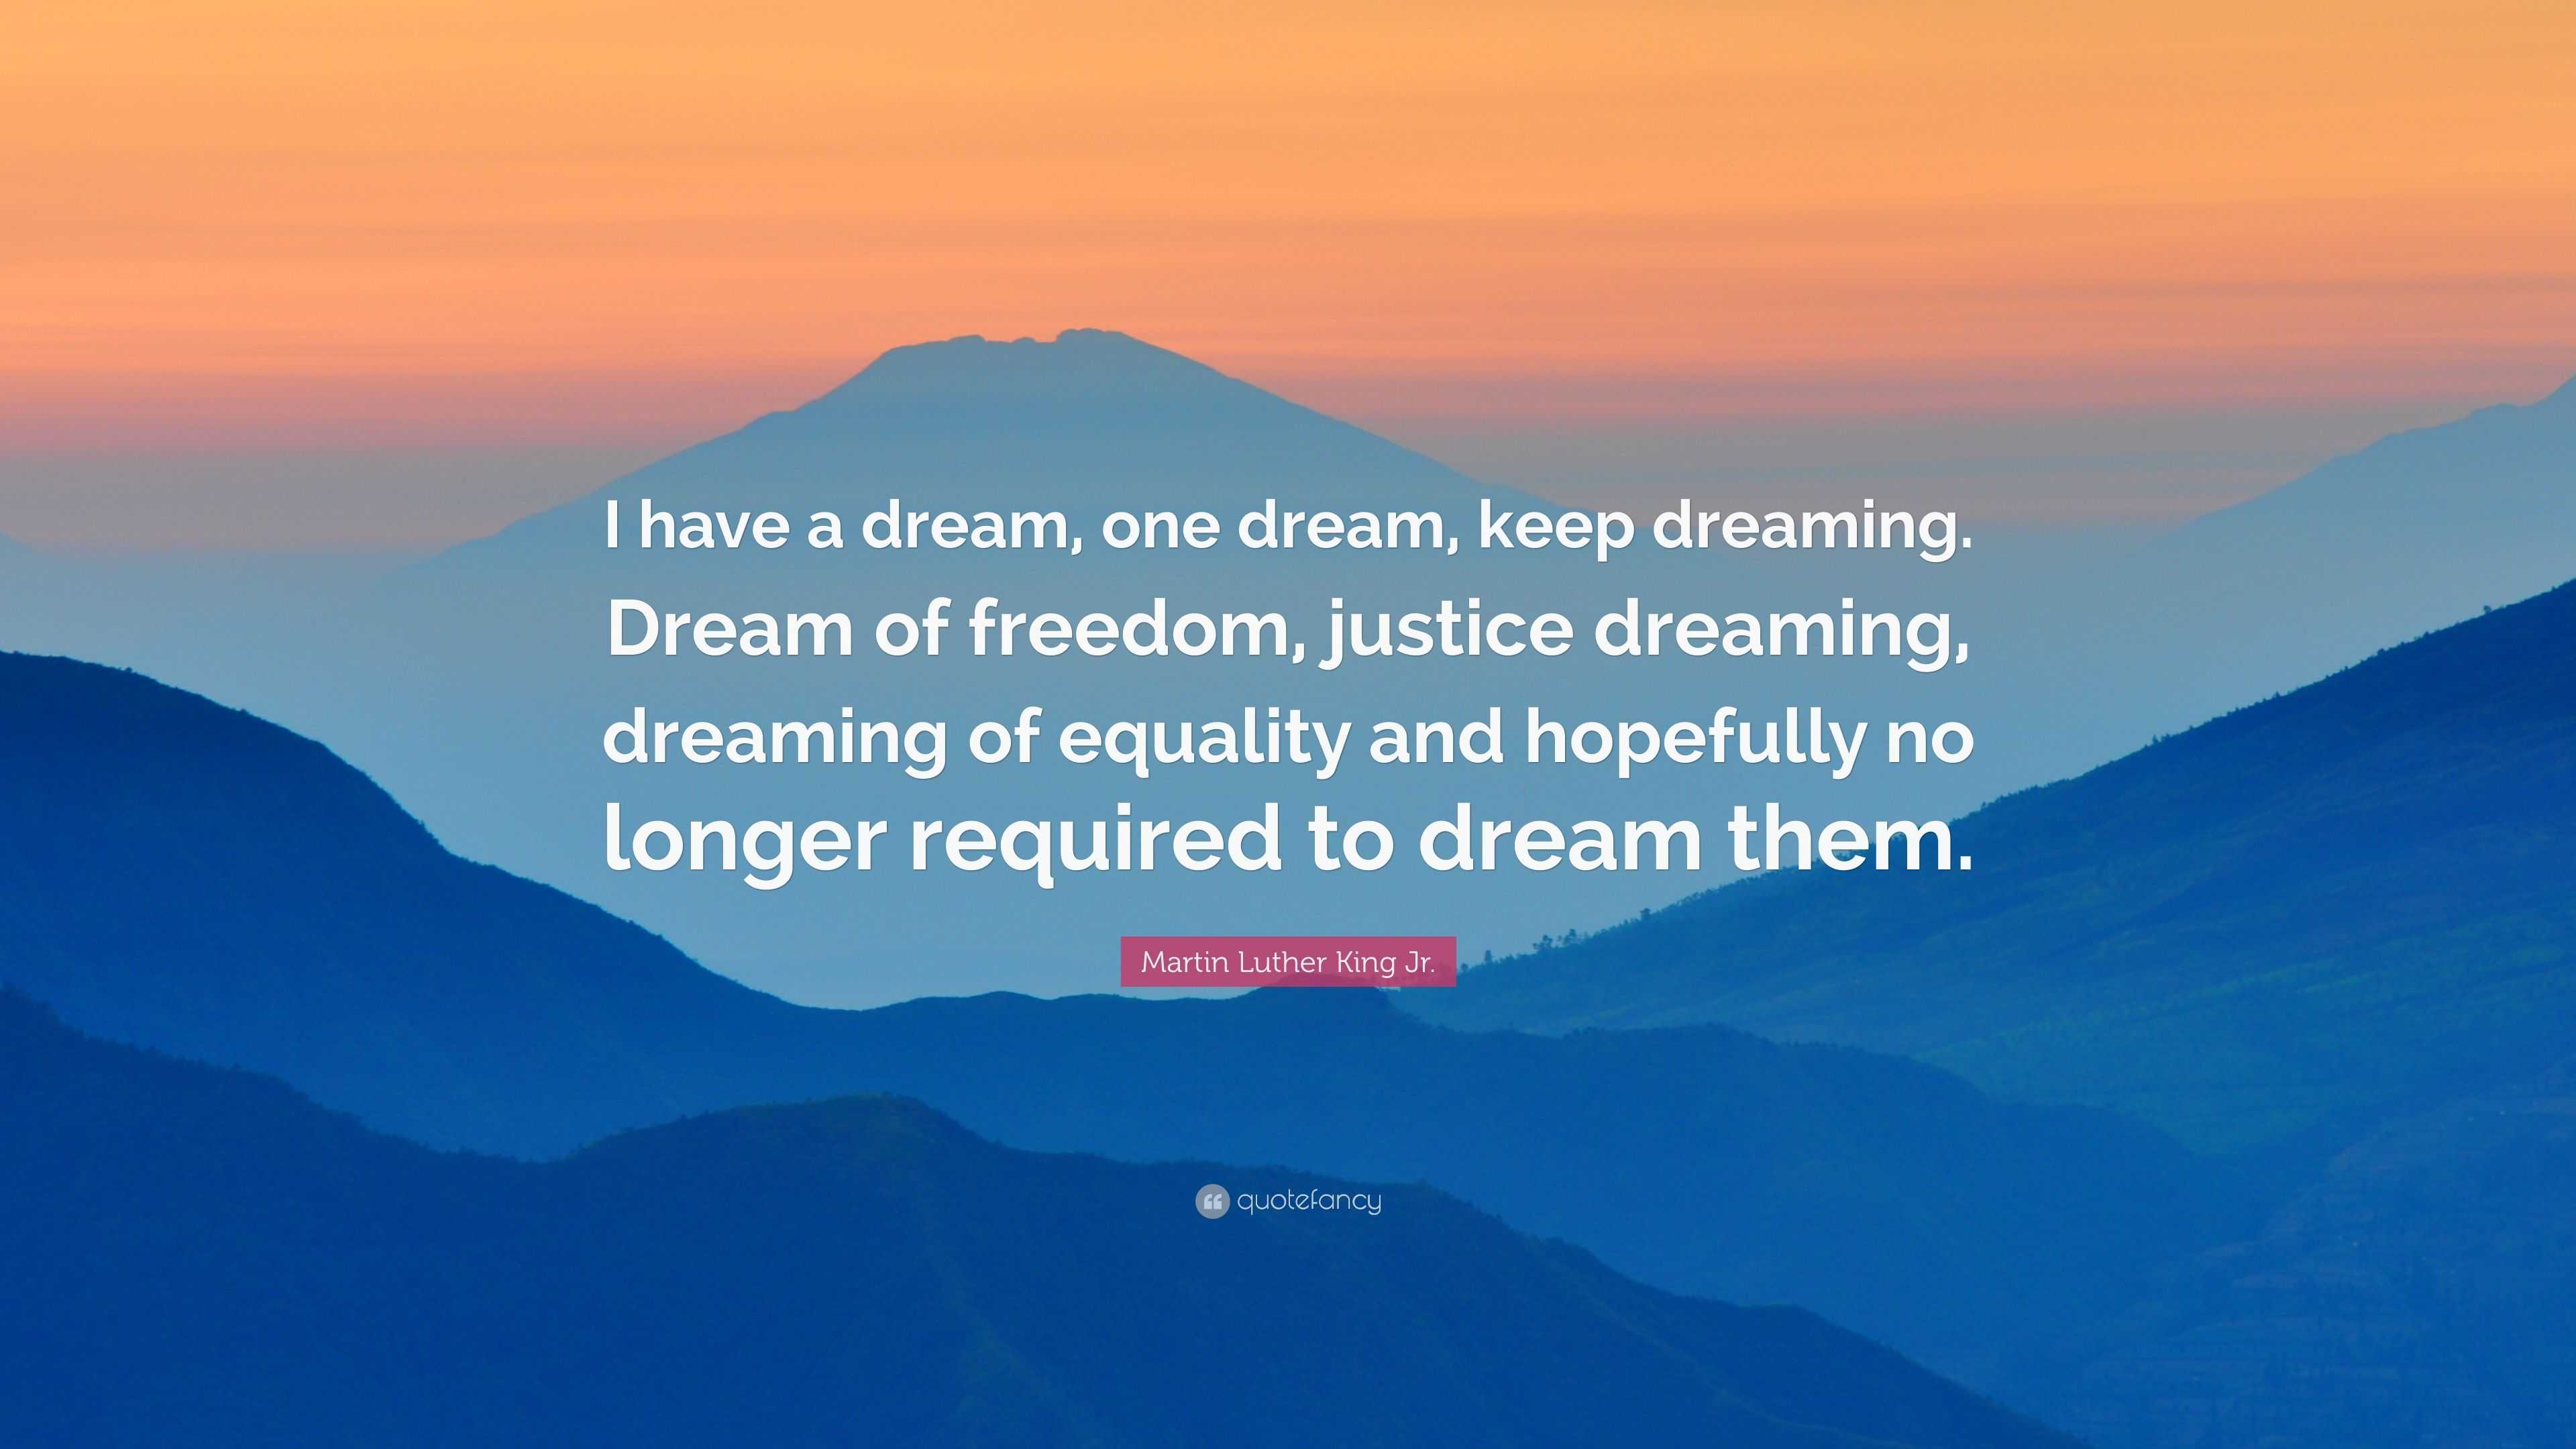 Martin Luther King Jr. Quote: “I have a dream, one dream, keep dreaming ...